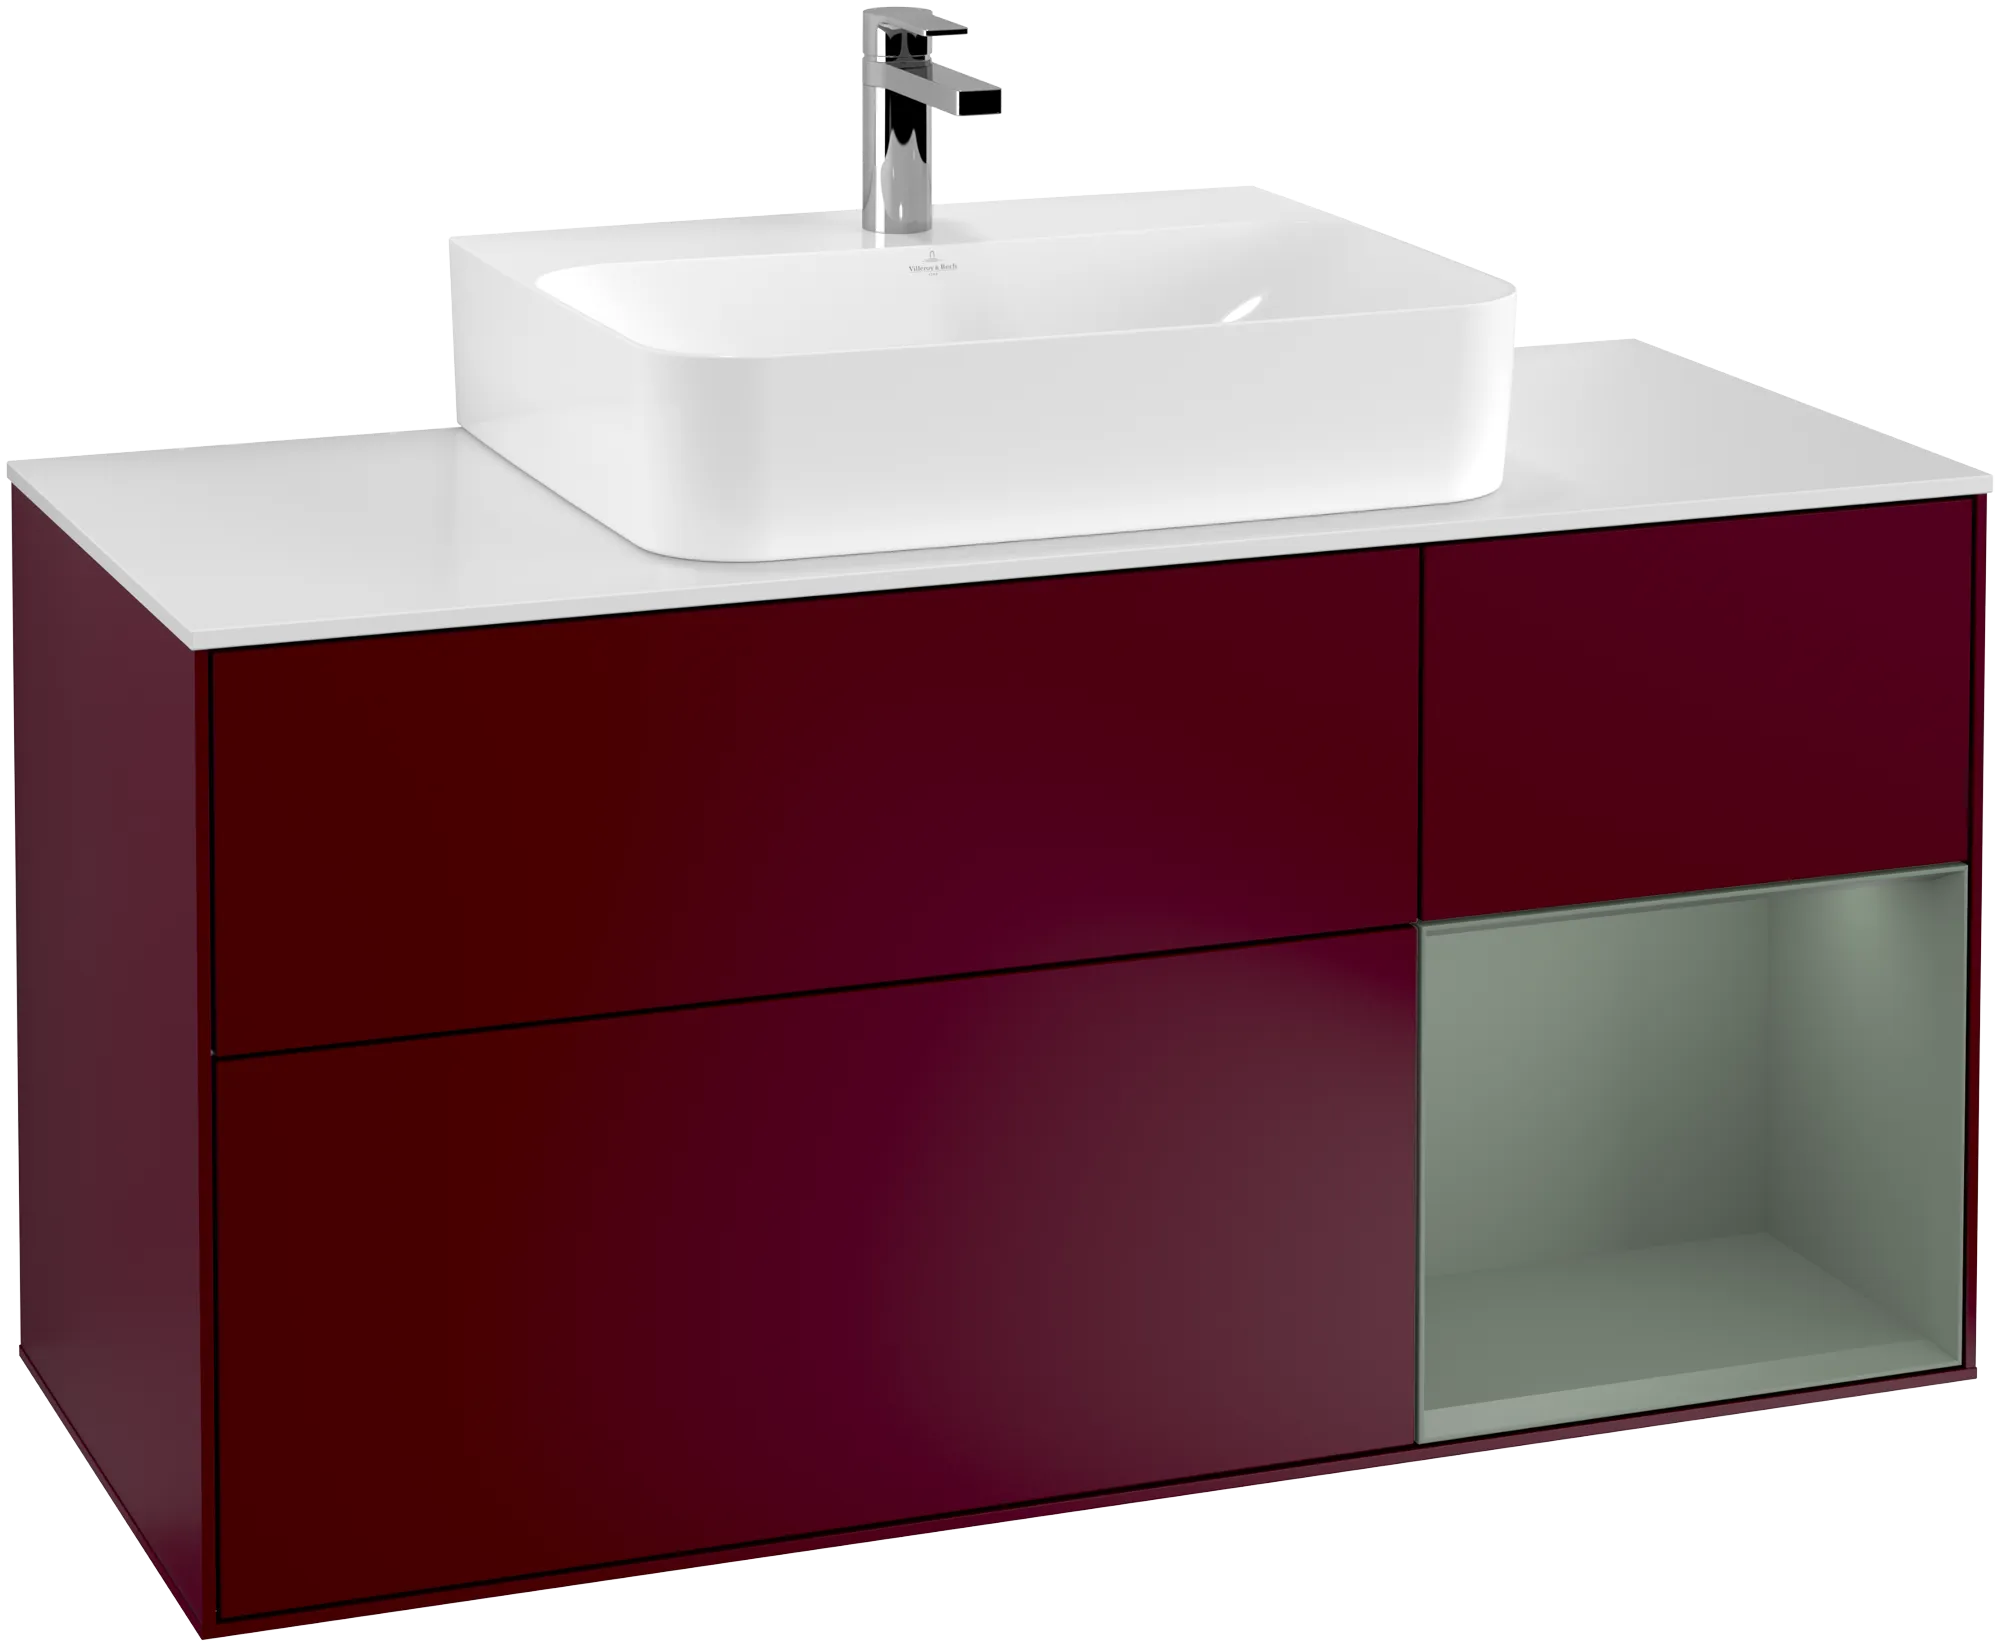 Picture of VILLEROY BOCH Finion Vanity unit, with lighting, 3 pull-out compartments, 1200 x 603 x 501 mm, Peony Matt Lacquer / Olive Matt Lacquer / Glass White Matt #G171GMHB